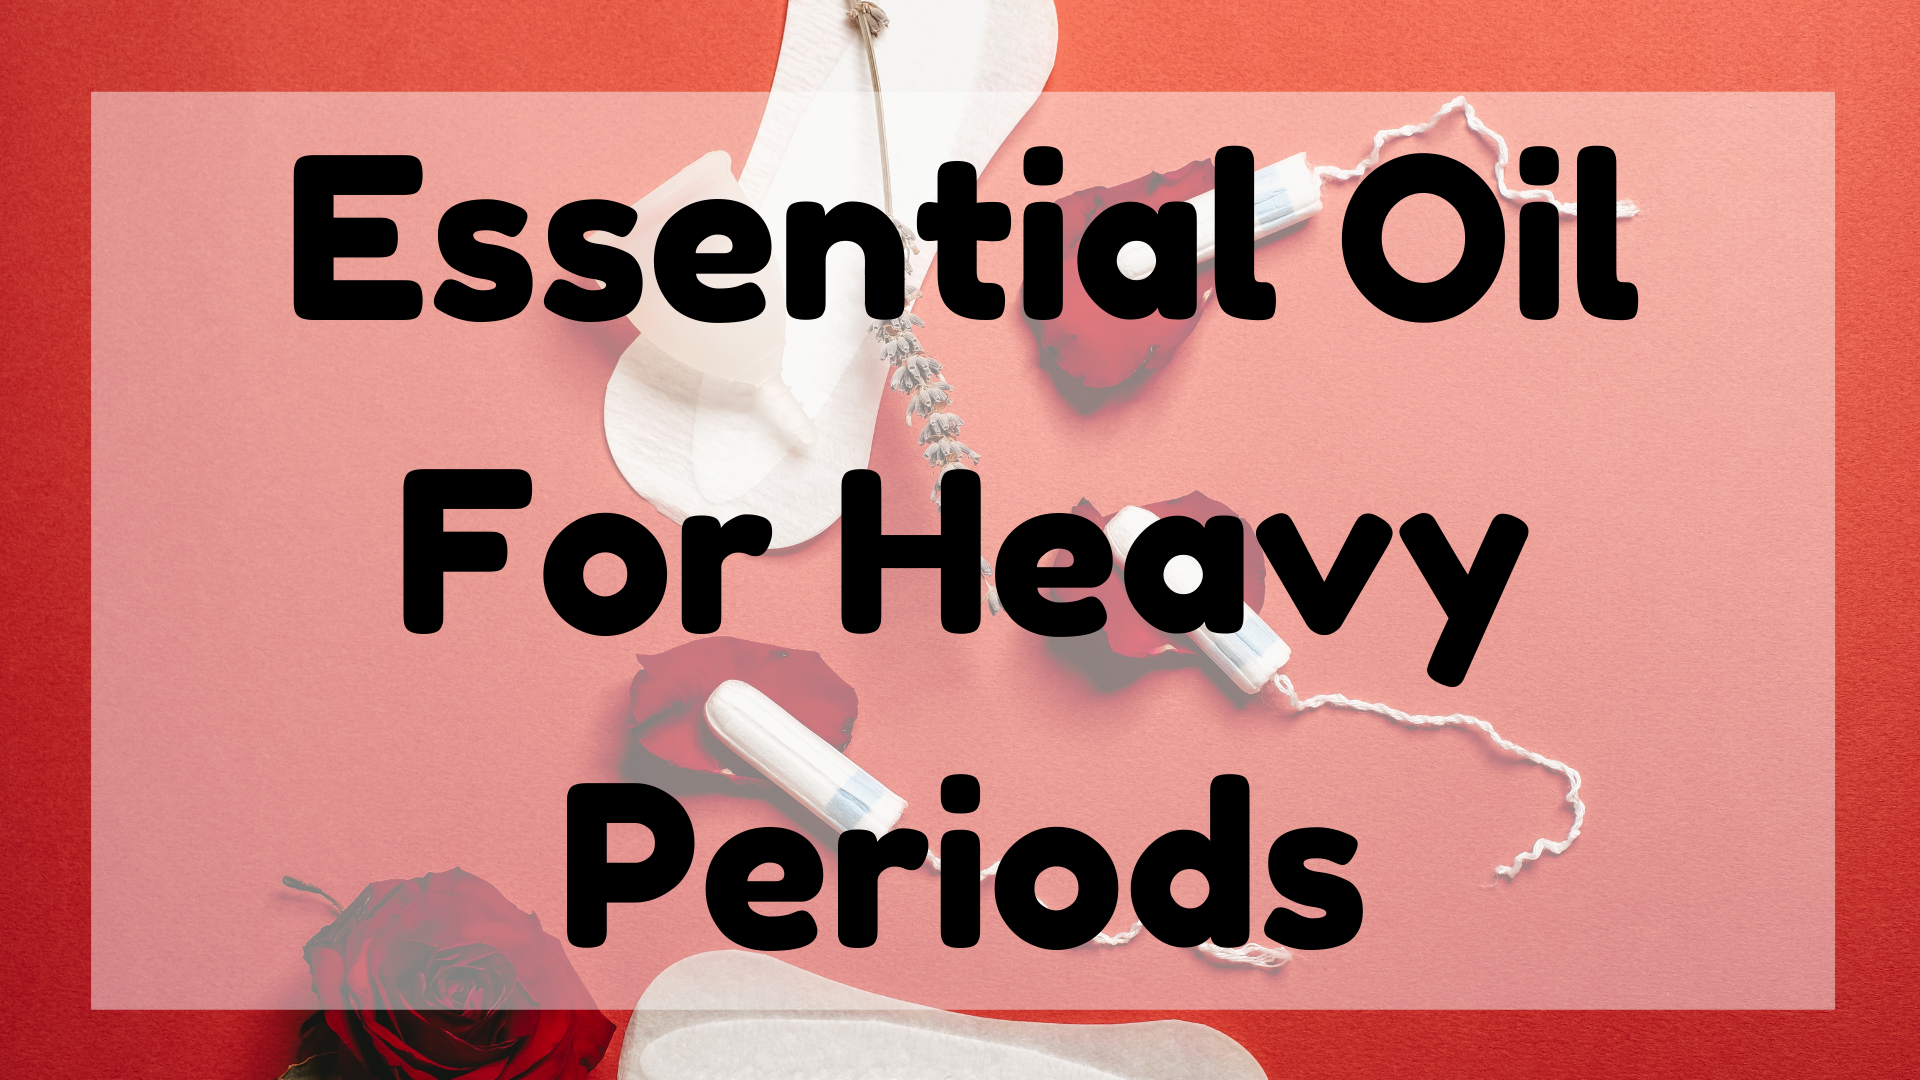 Essential Oil For Heavy Periods